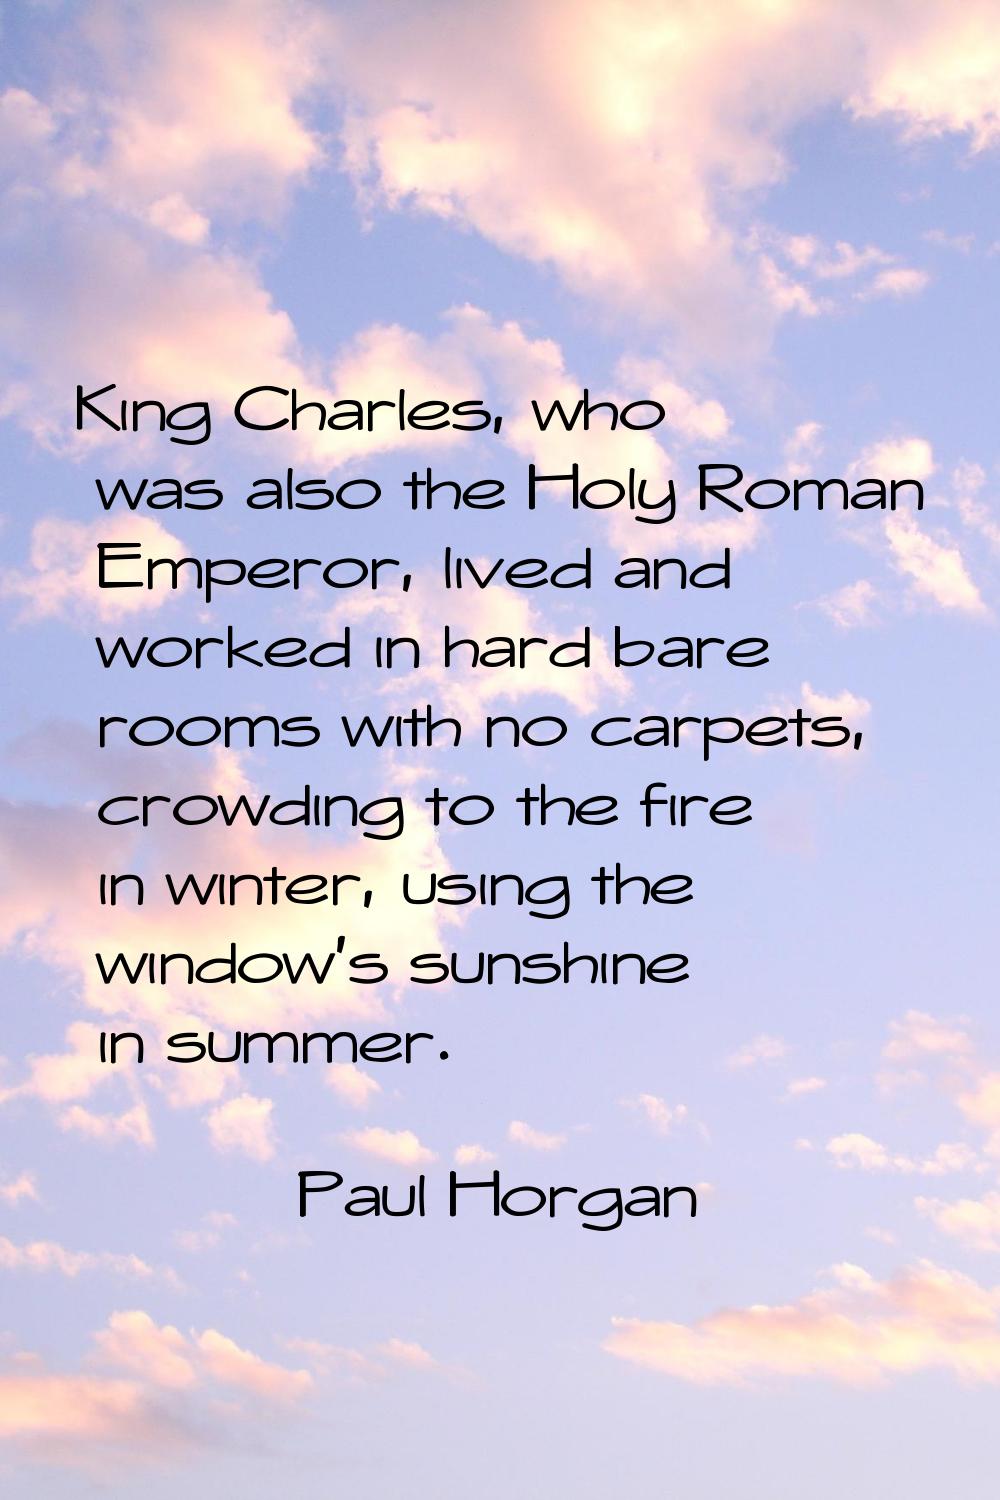 King Charles, who was also the Holy Roman Emperor, lived and worked in hard bare rooms with no carp